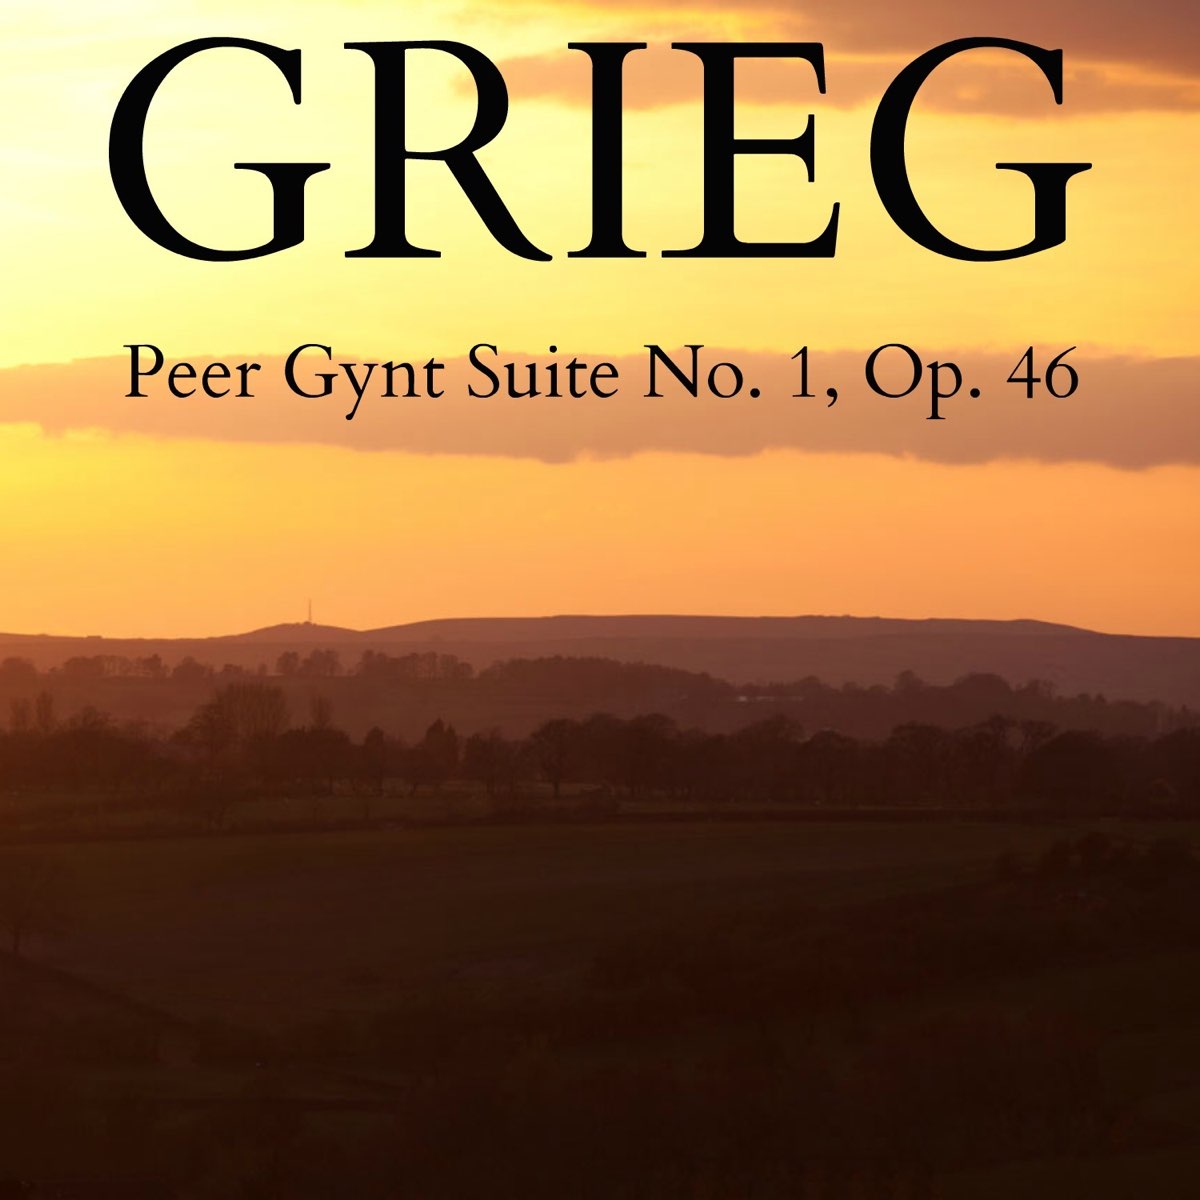 Edvard Grieg peer Gynt, Suite no 1. Grieg: peer Gynt Suite no. 1, "in the Hall of the Mountain King". Peer Gynt Suite no 1 op 46 in the Hall. Peer Gynt Suite no. 1, op. 46.